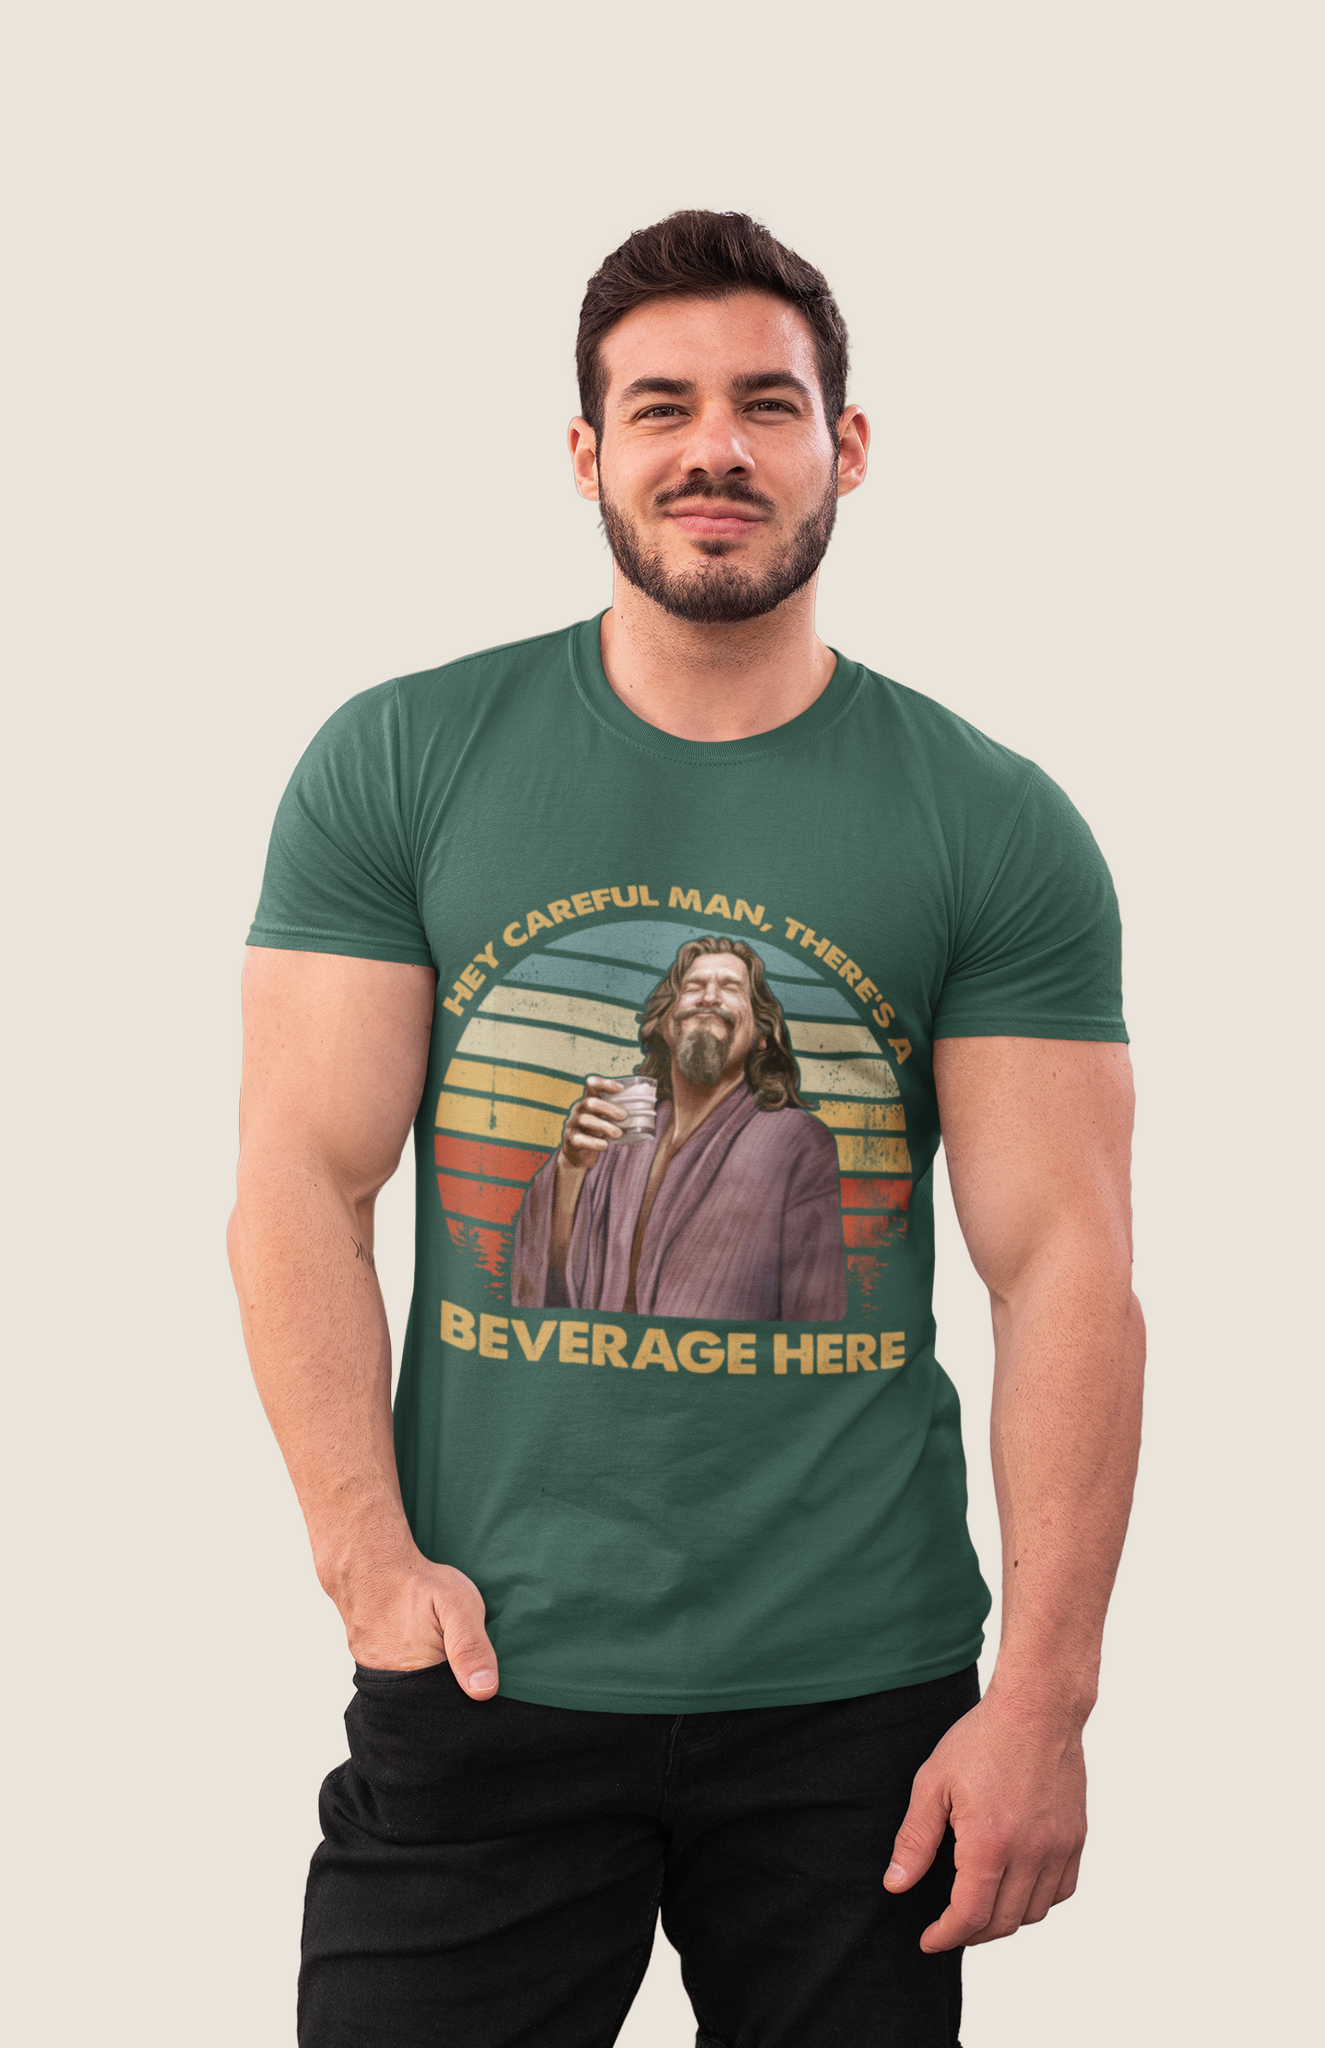 The Big Lebowski Vintage T Shirt, Hey Careful Man Theres A Beverage Here Tshirt, The Dude T Shirt